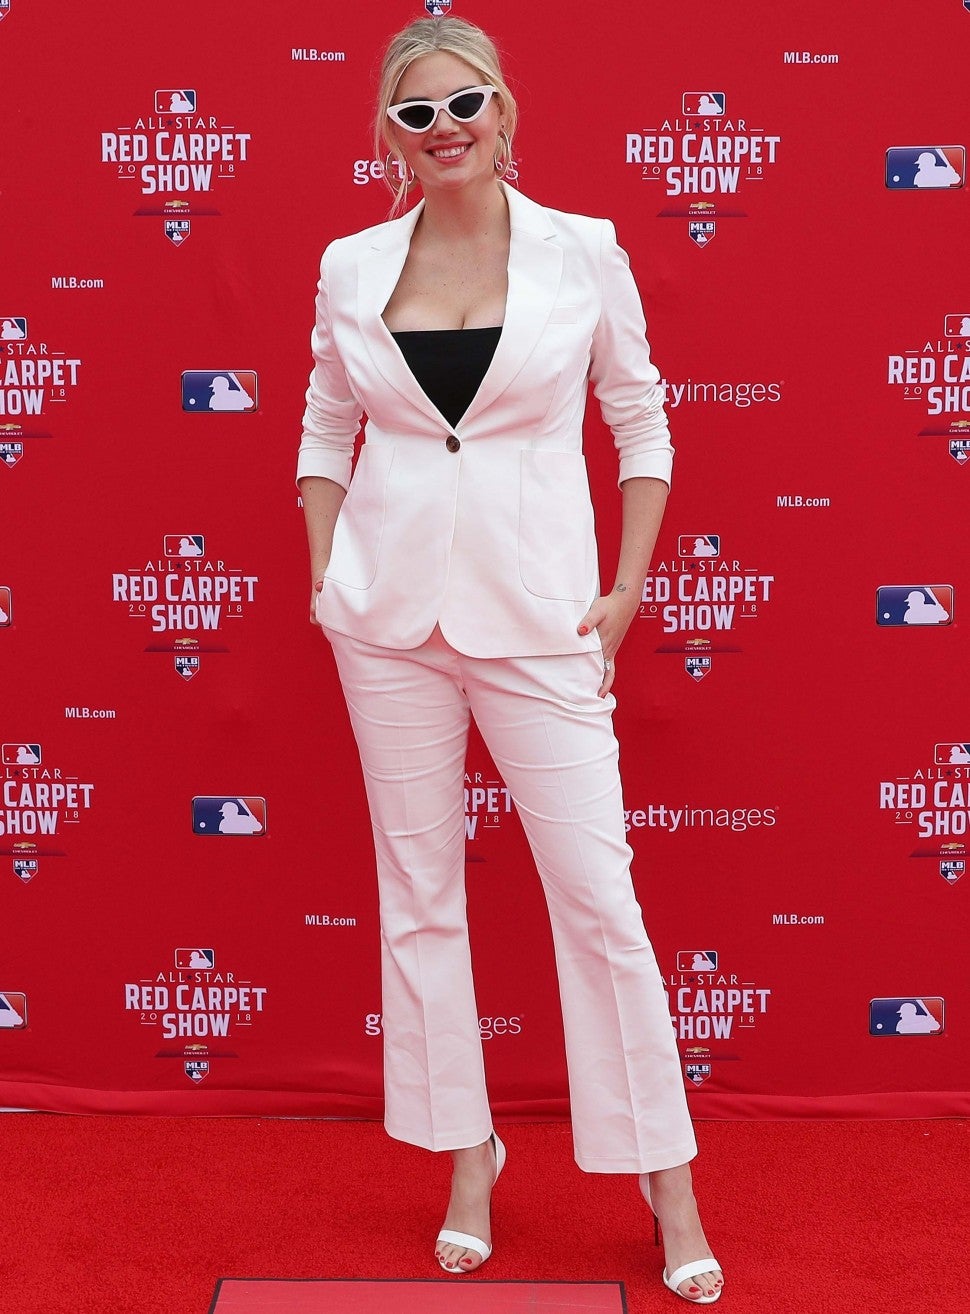 Kate Upton at the 89th MLB All-Star Game in Washington, D.C.